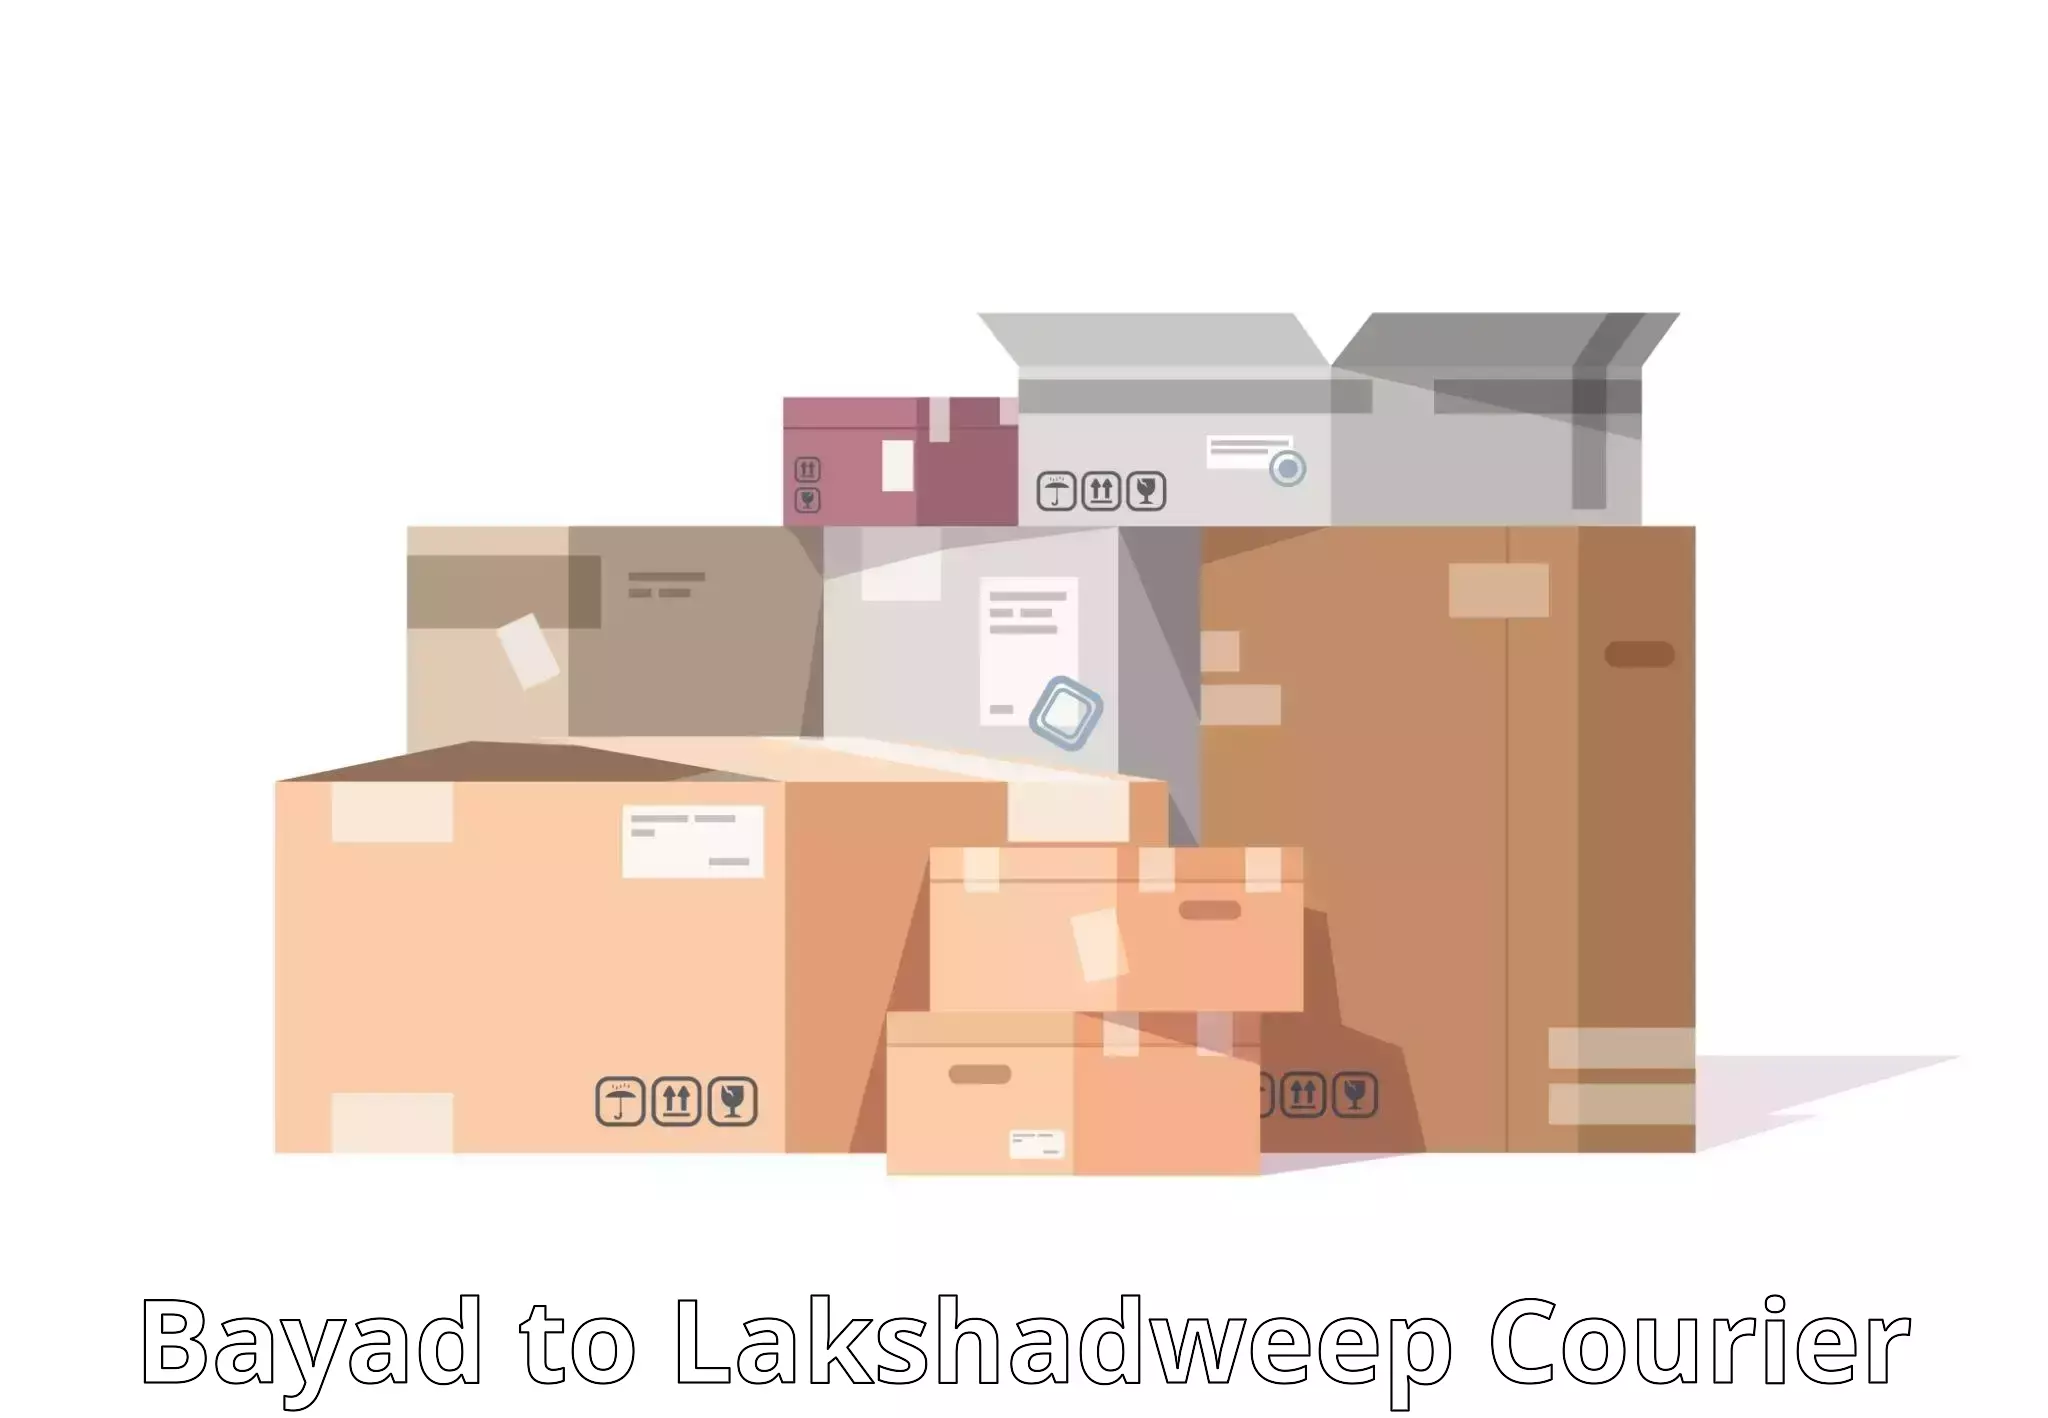 Express delivery capabilities in Bayad to Lakshadweep